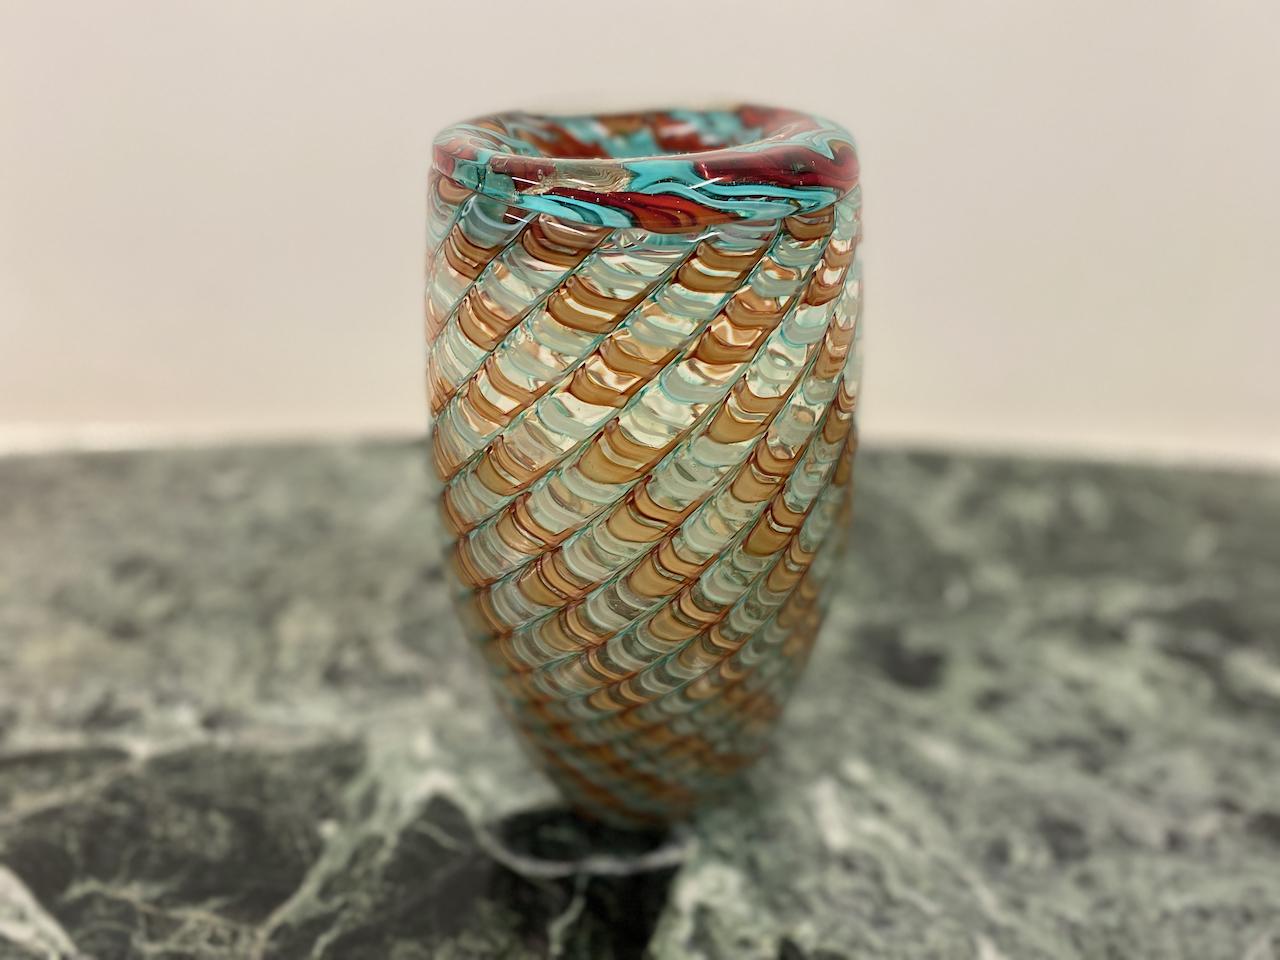 Murano Glass Vase by Stefano Toso 2